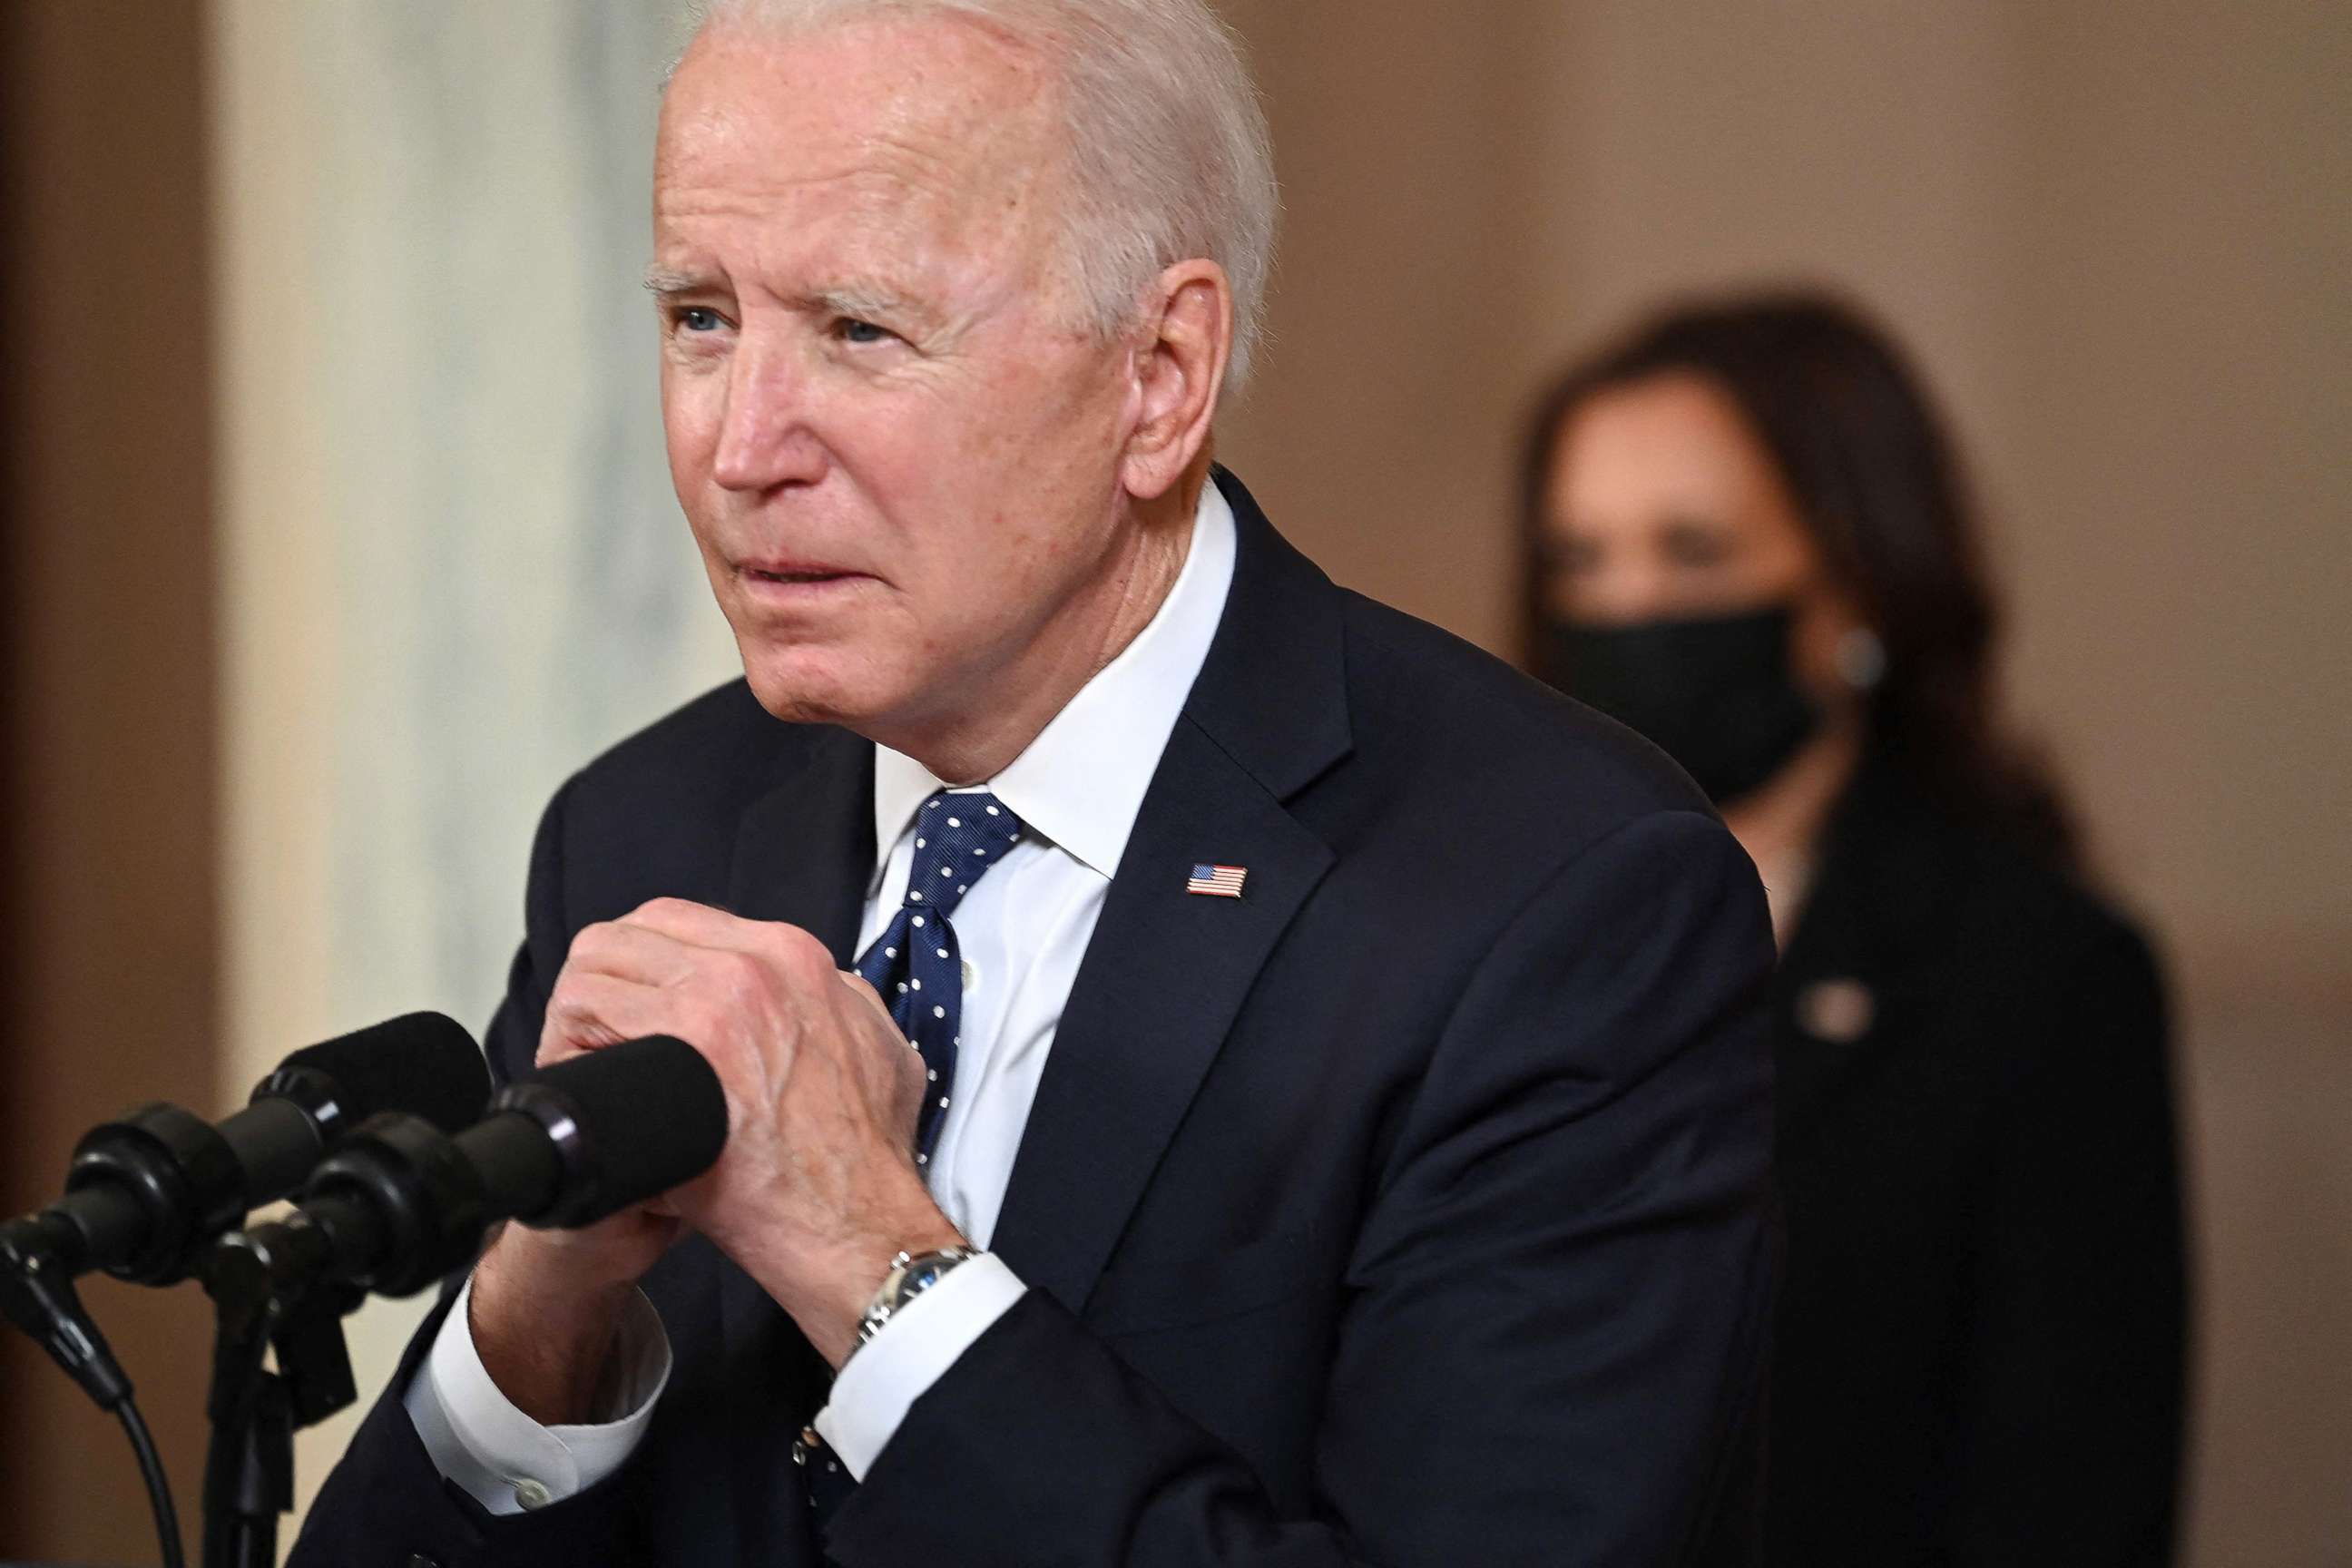 PHOTO: President Joe Biden delivers remarks on the guilty verdict against former policeman Derek Chauvin at the White House, April 20, 2021, with Vice President Kamala Harris.